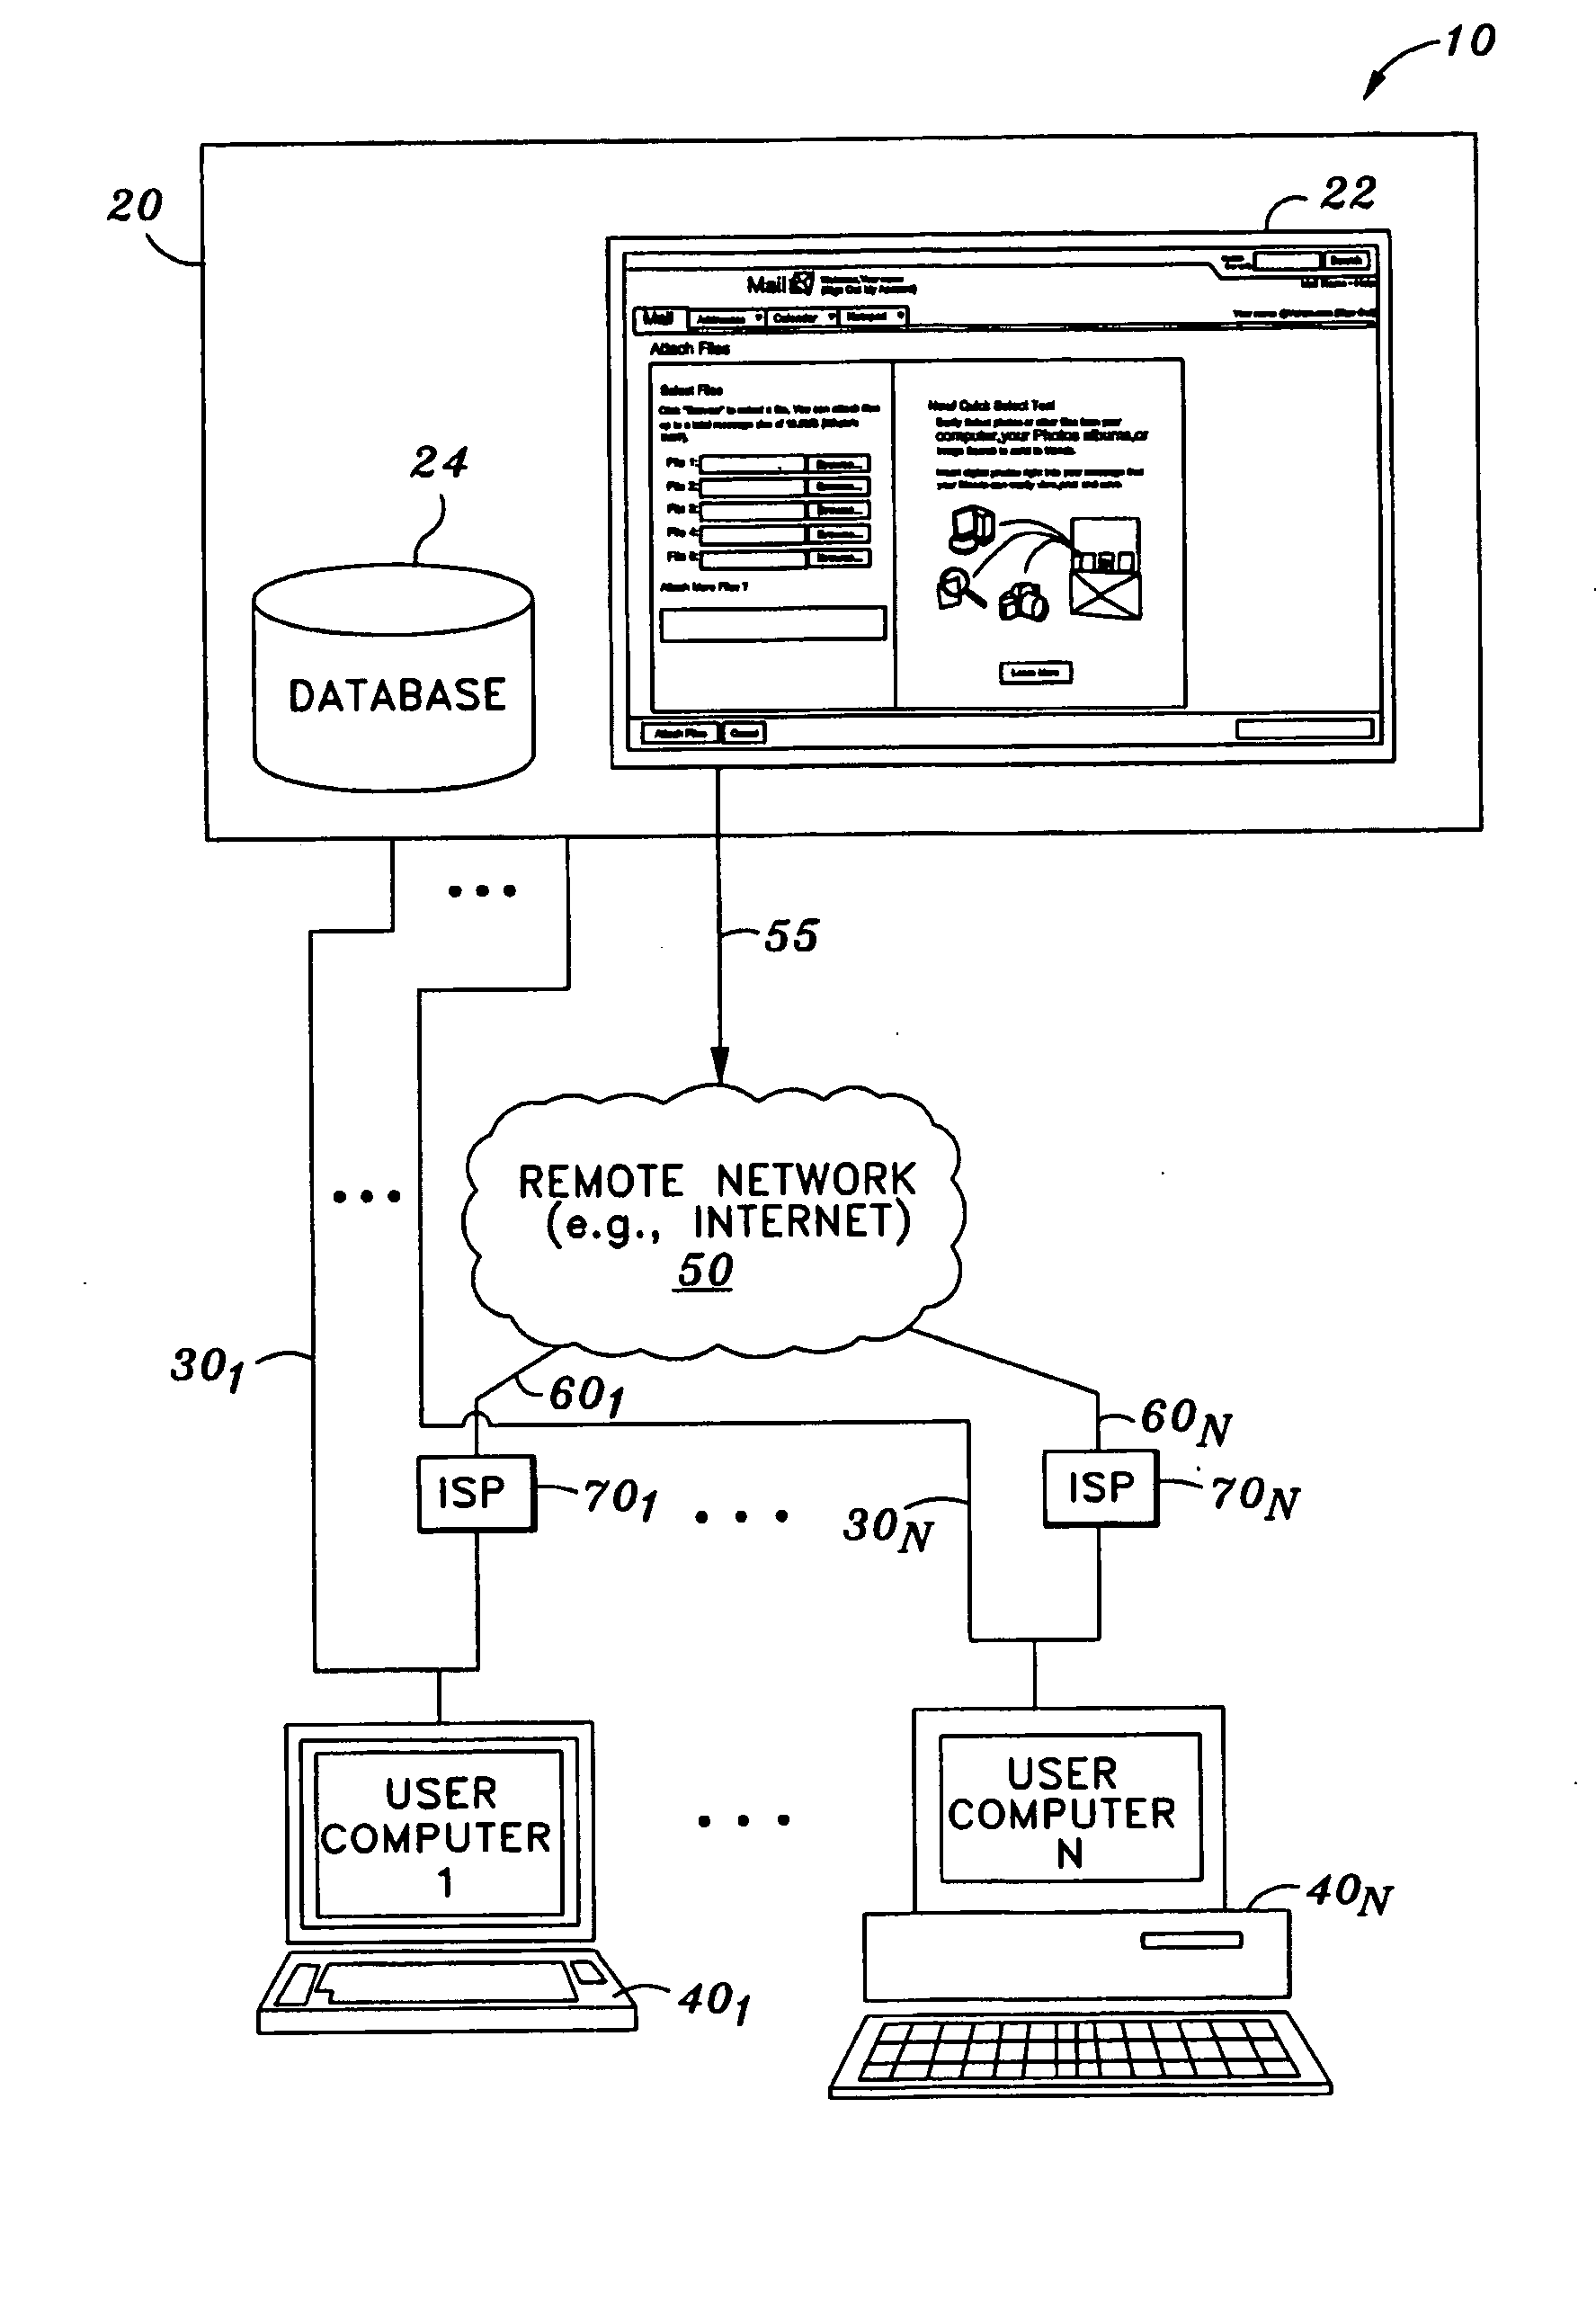 System and method for uploading files